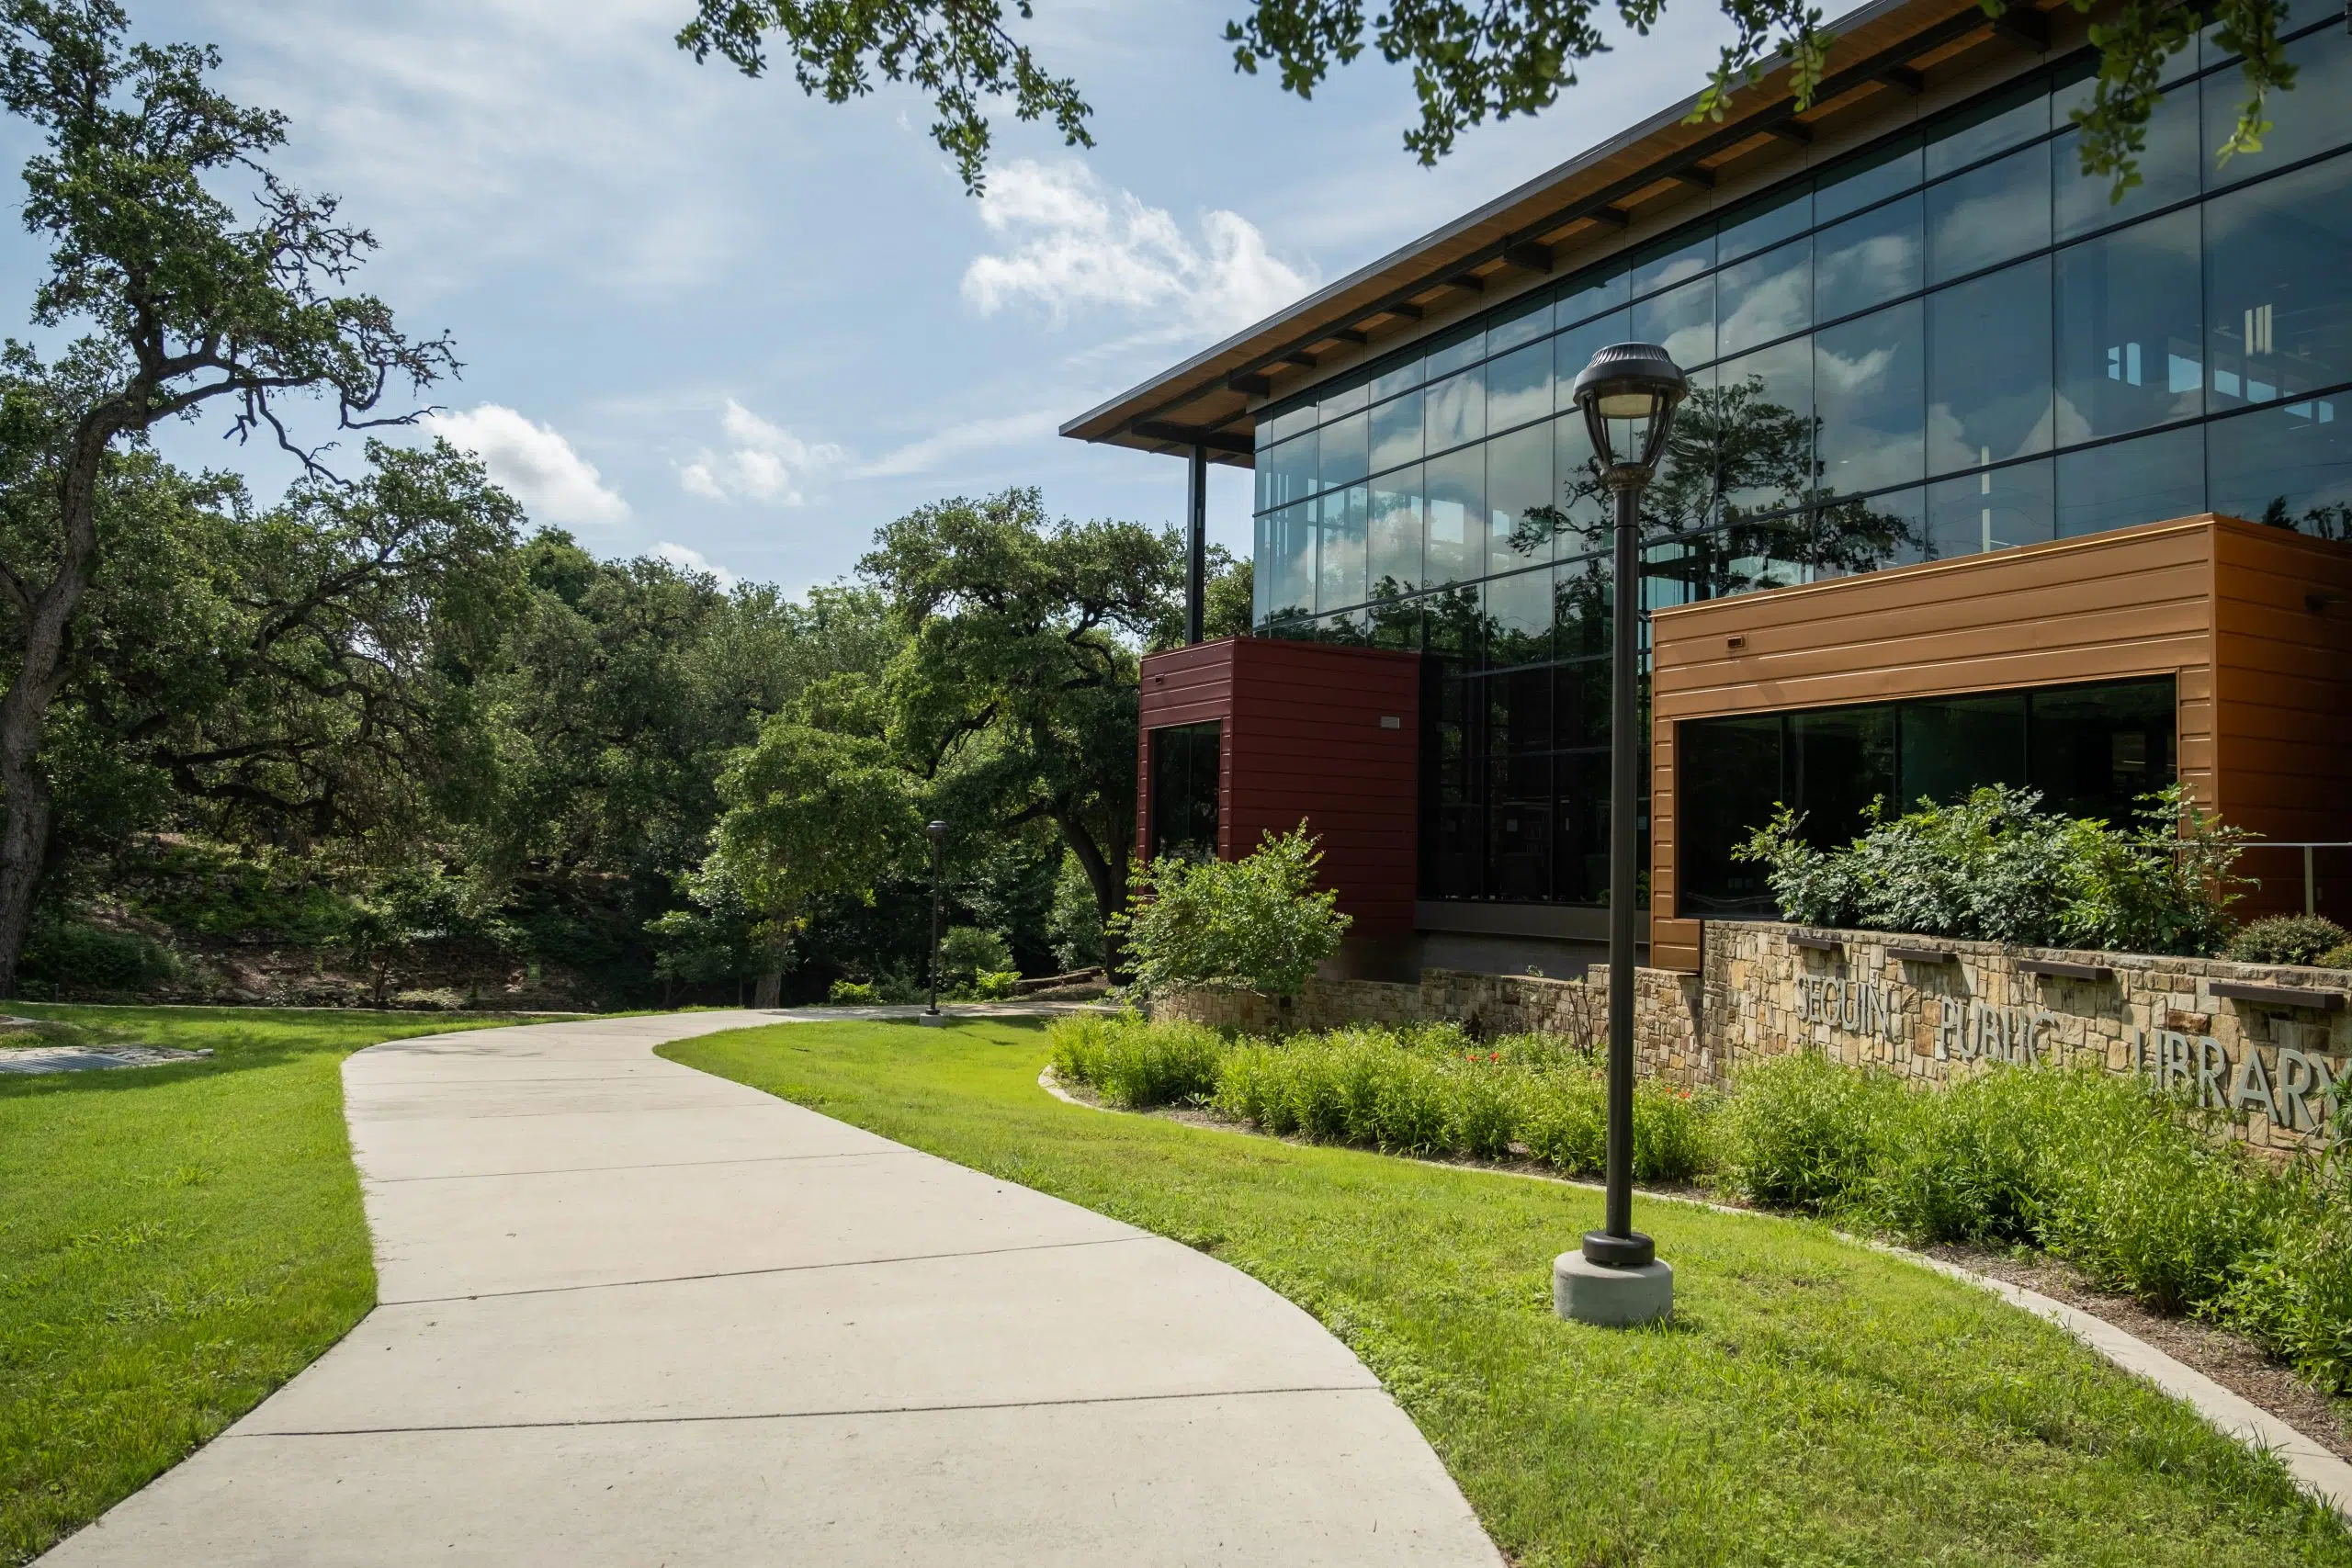 The Seguin Public Library is now fine free